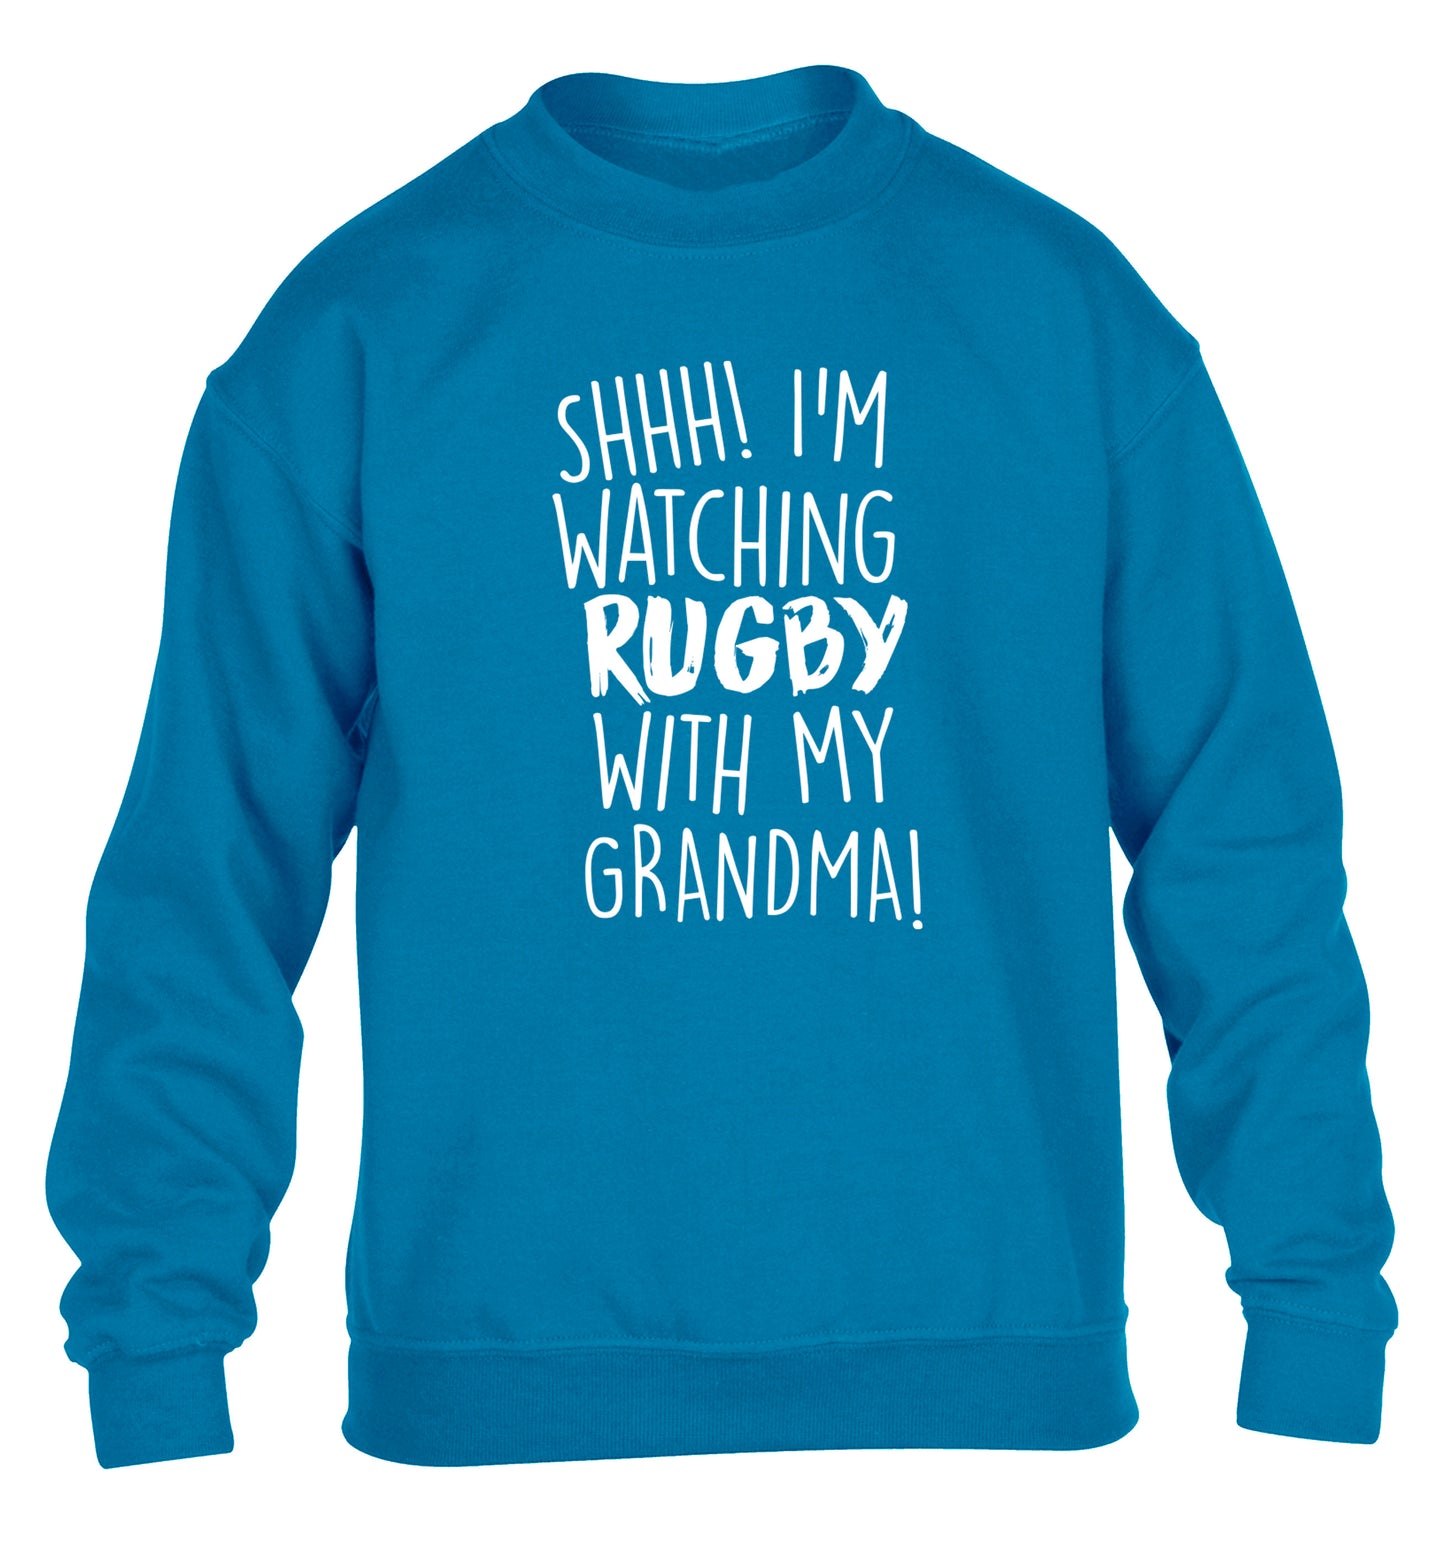 Shh I'm watching rugby with my grandma children's blue sweater 12-13 Years